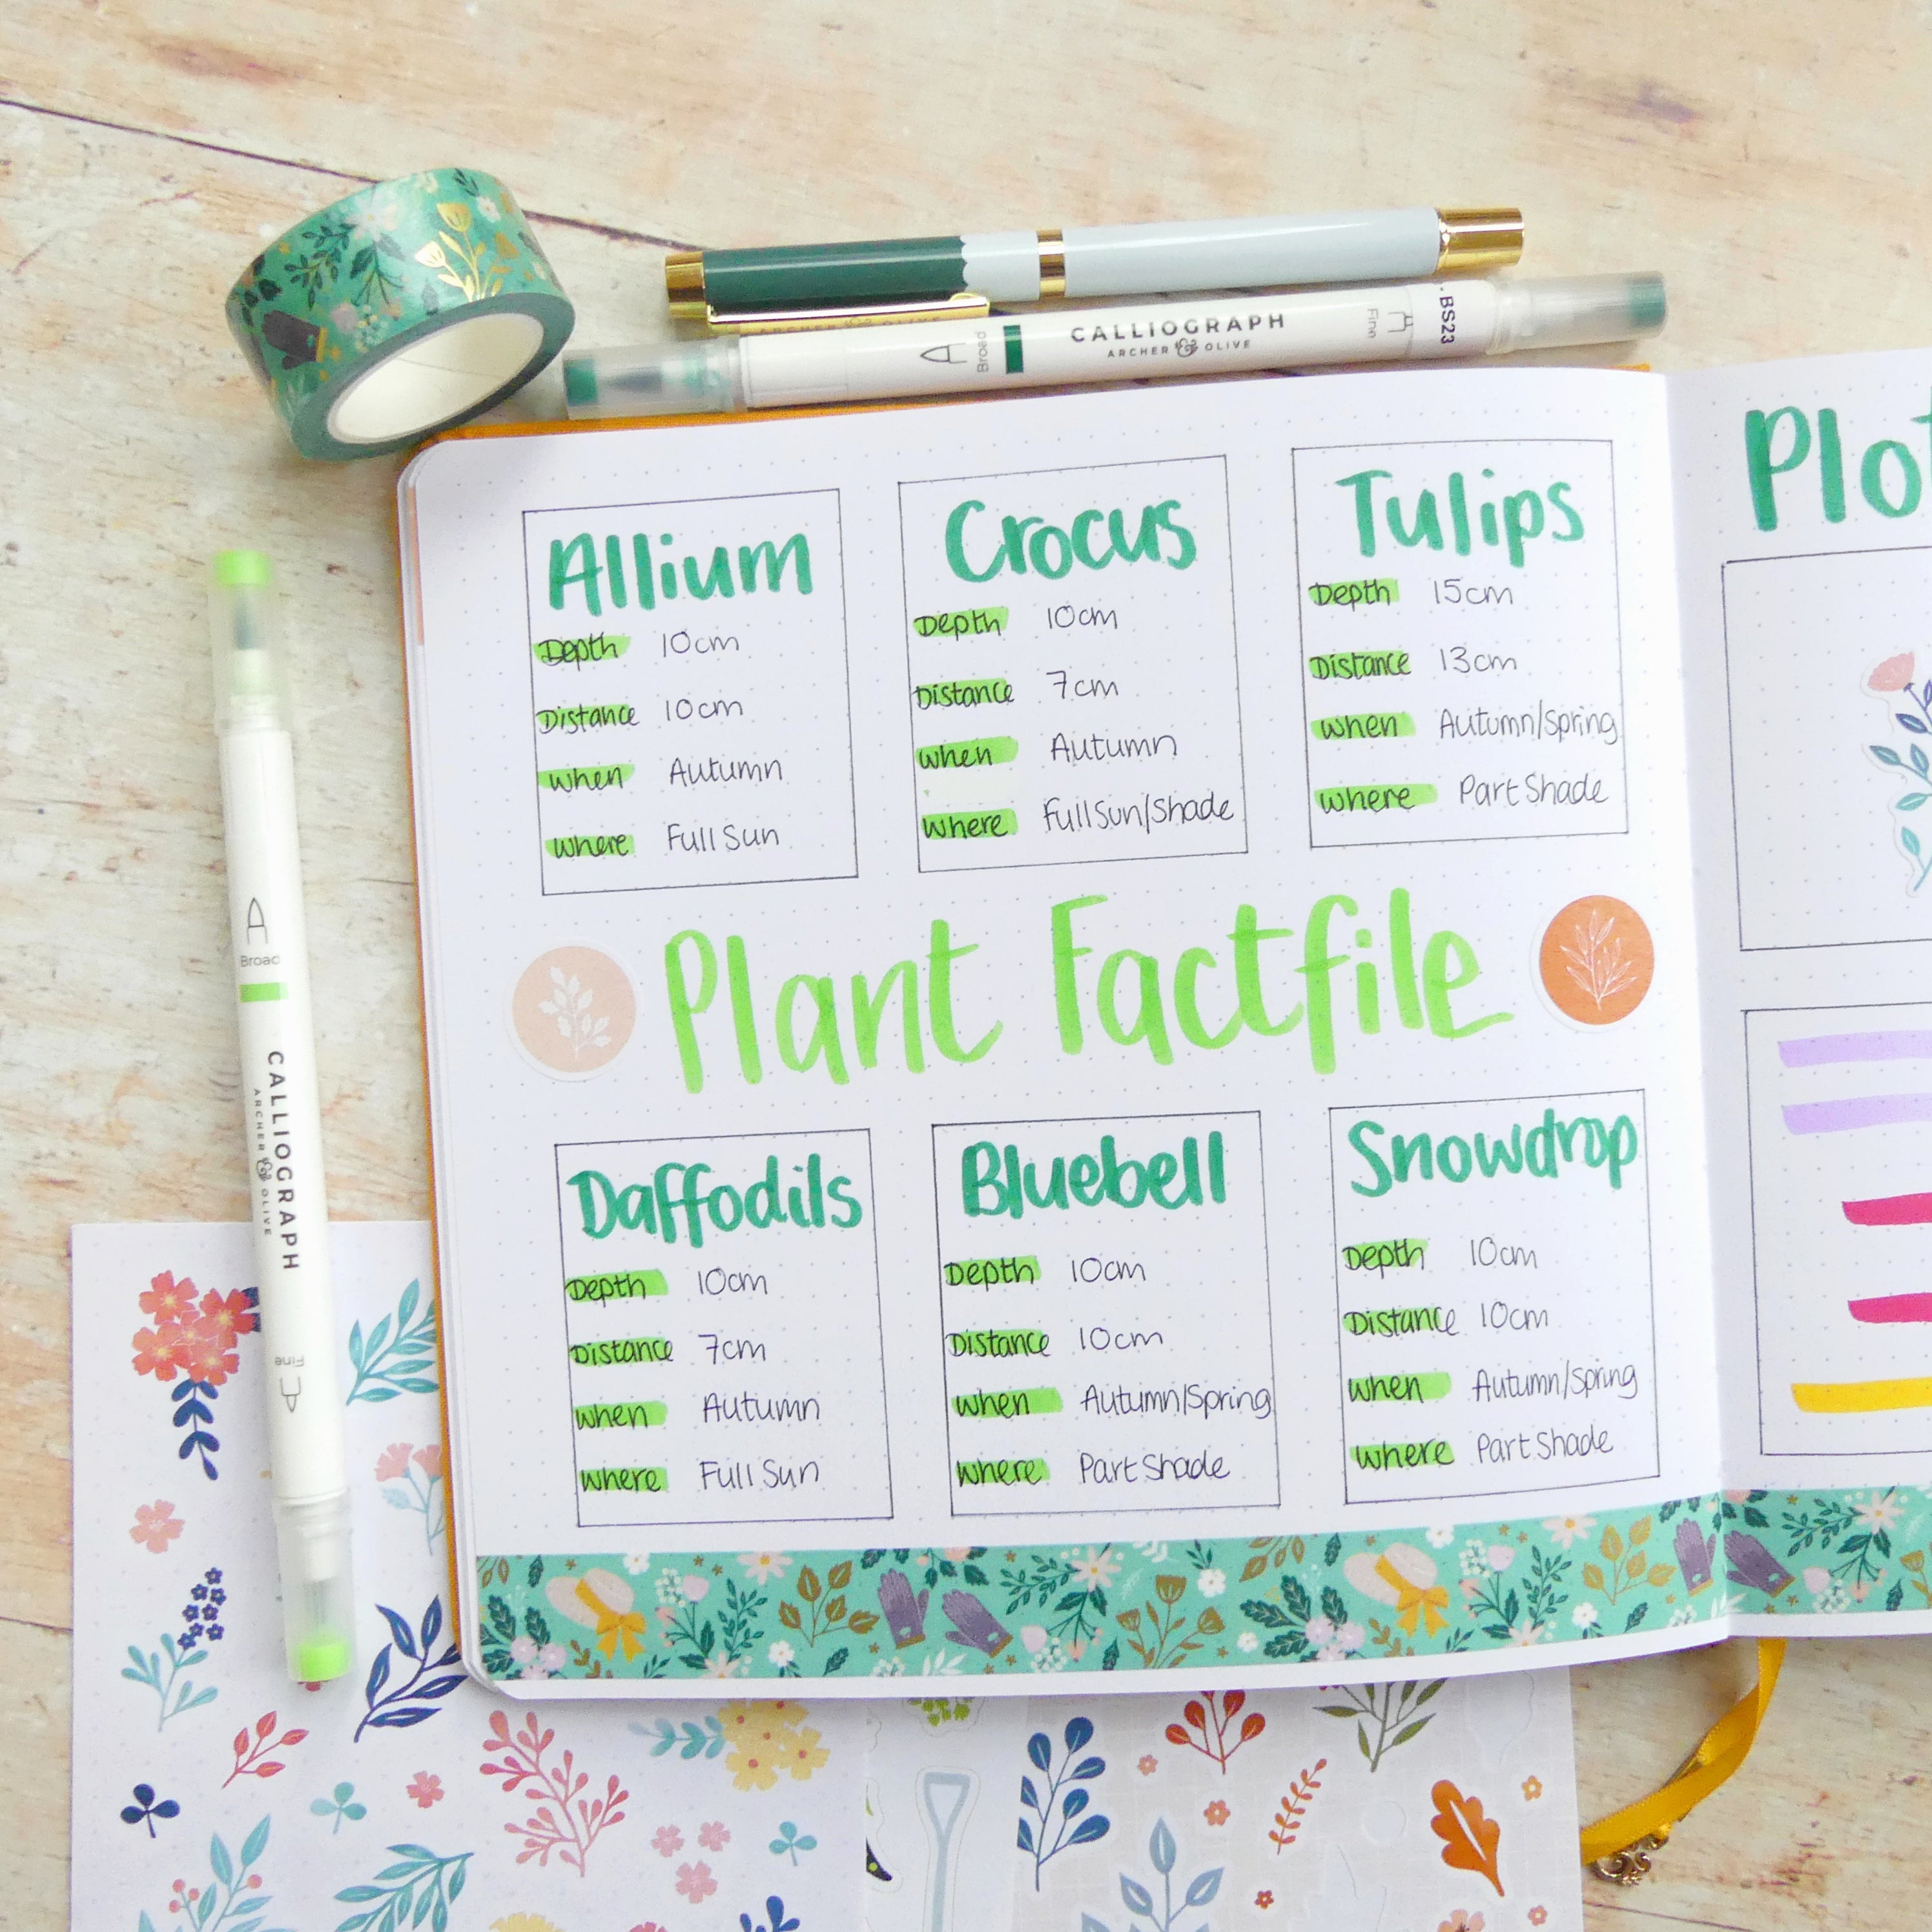 Finished plant fact file with washi and stickers added